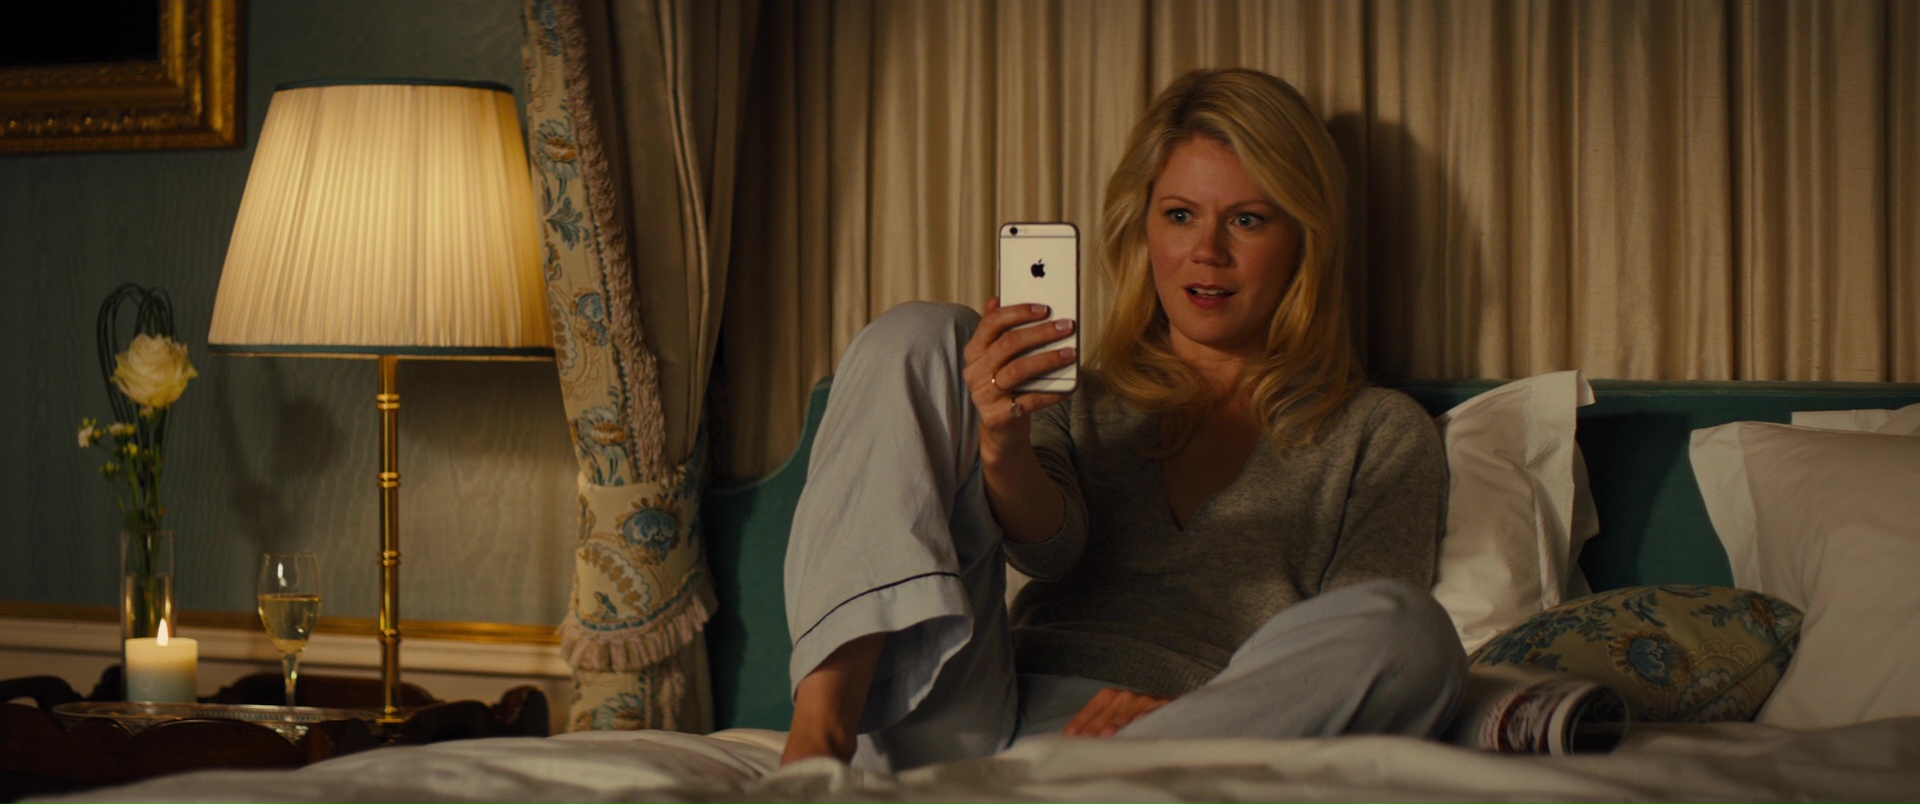 Apple iPhone Used by Hanna Alström in Kingsman 2: The ...